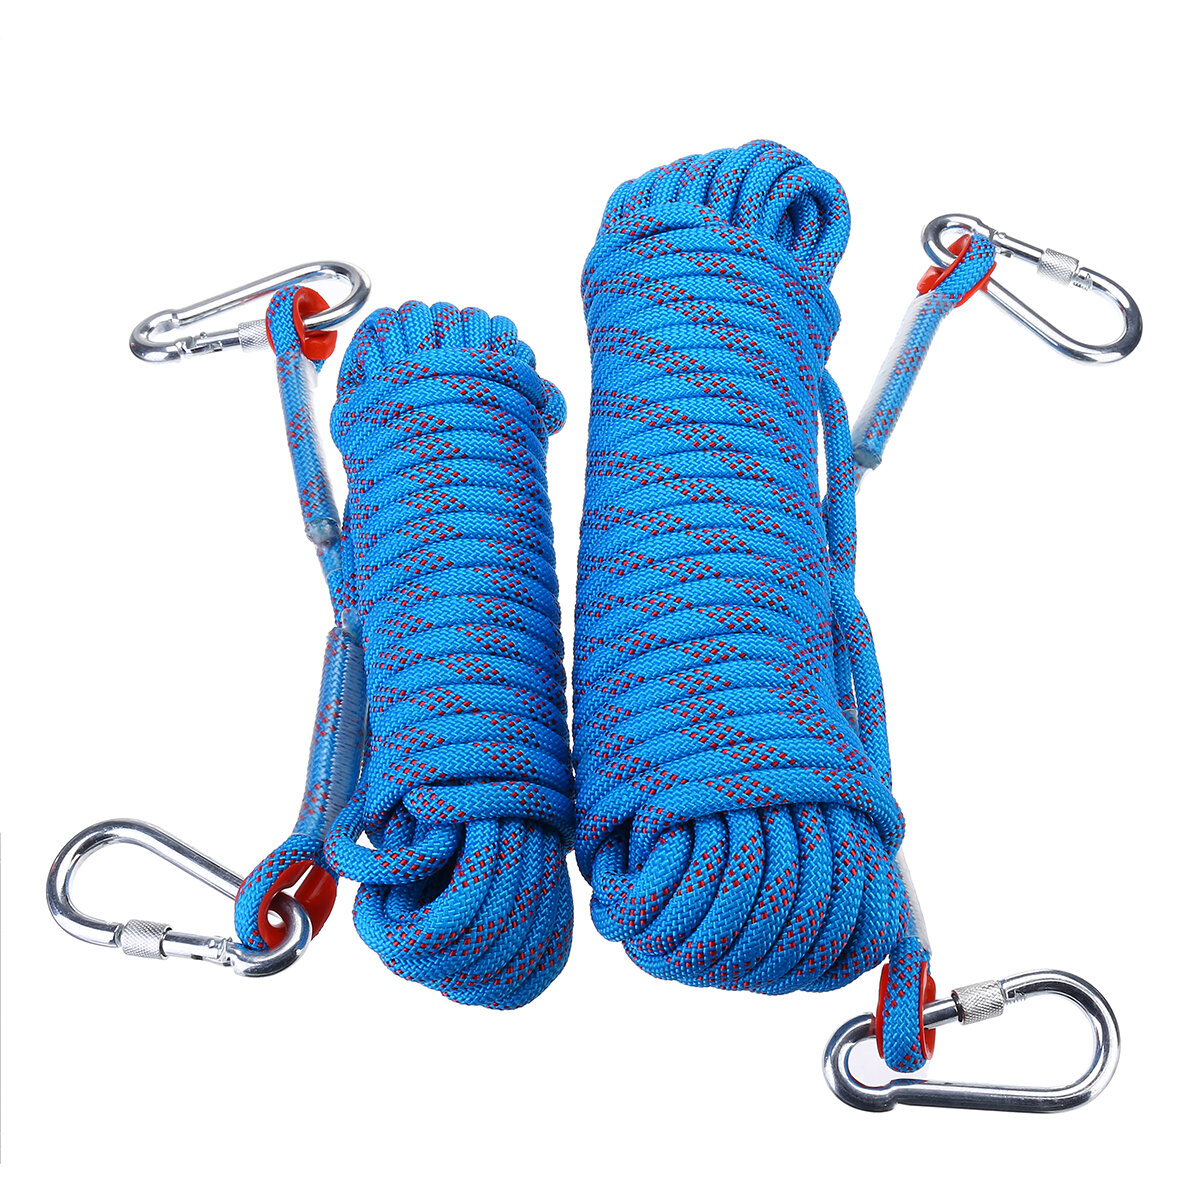 10mm 10/20M Professional Rock Climbing Cord Outdoor Hiking Rope High Strength Safety Sling Cord Rappelling Rope Equipmen